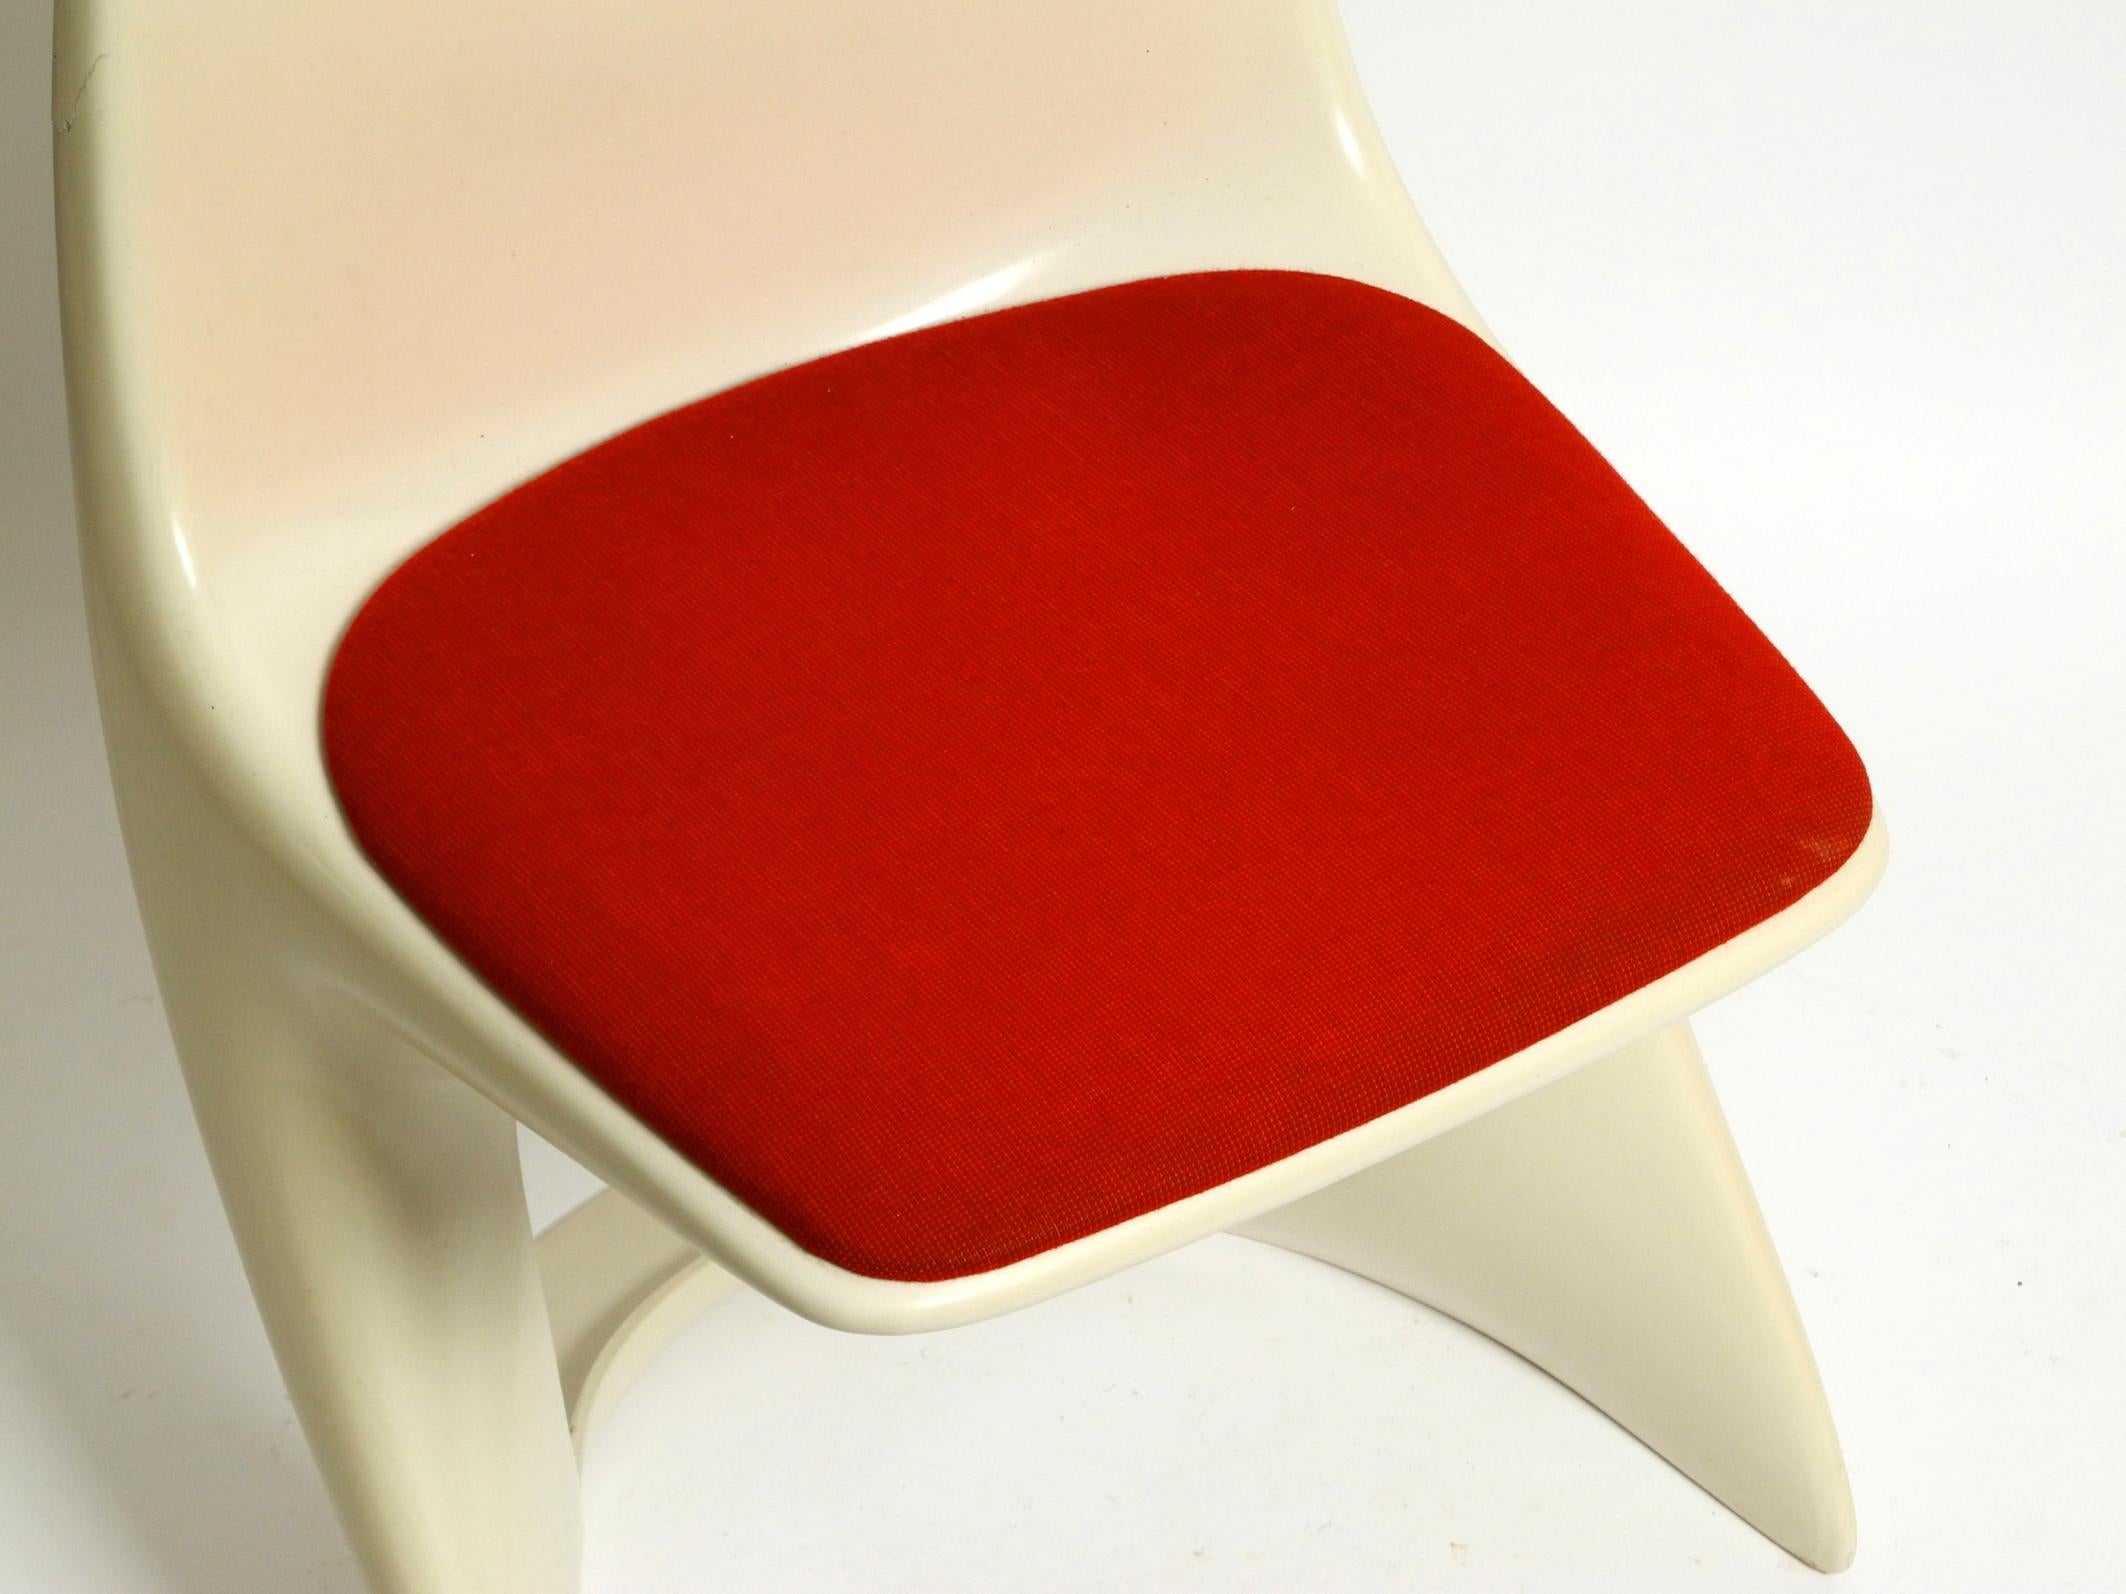 Plastic Casala Chair Model 2001/2002 from the 1970s with Original Red Fabric Upholstery